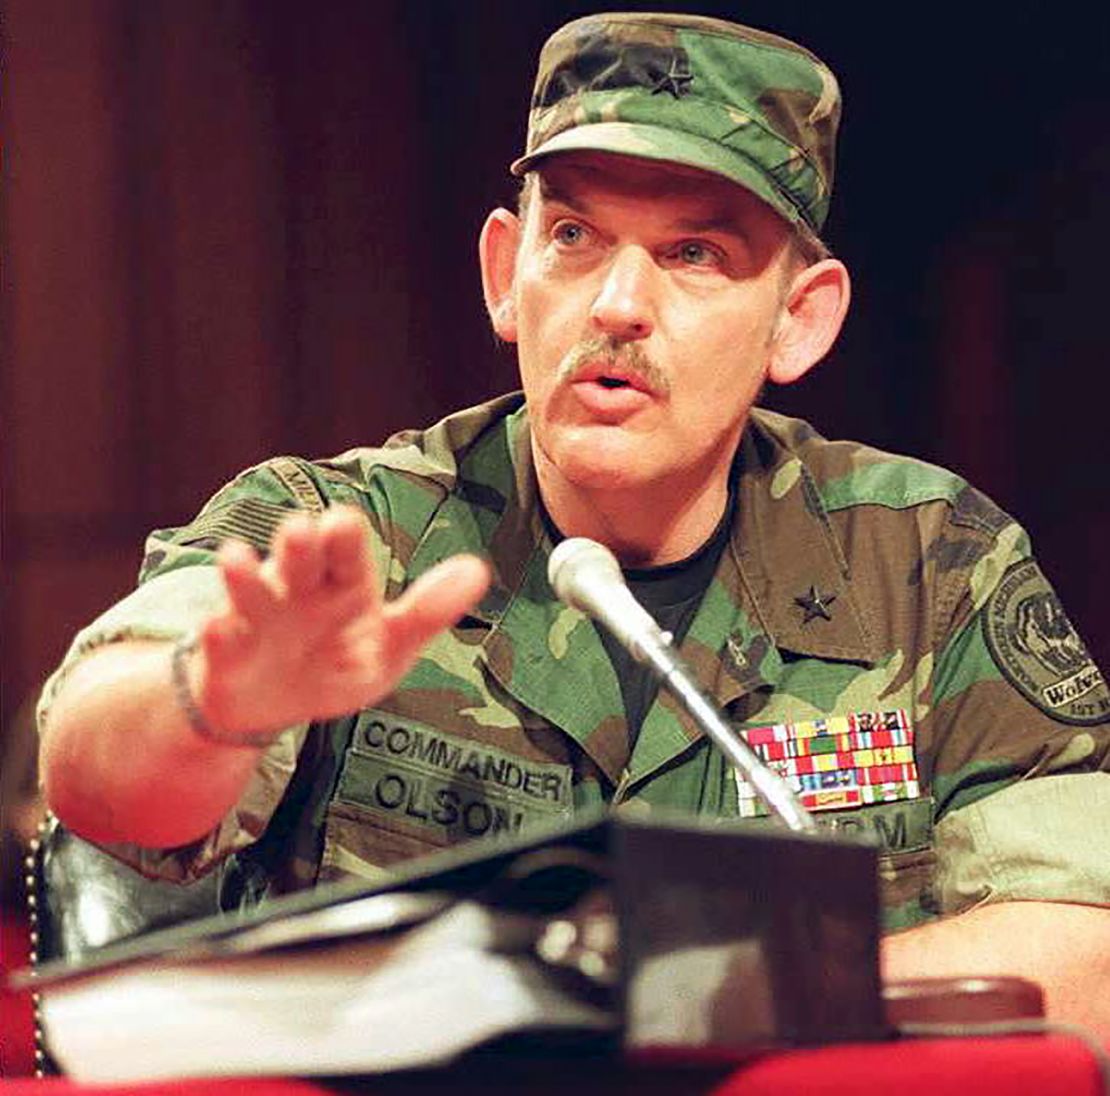 Norman Olson, then a militia commander, testified in fatigues before a Senate subcommittee in 1995.